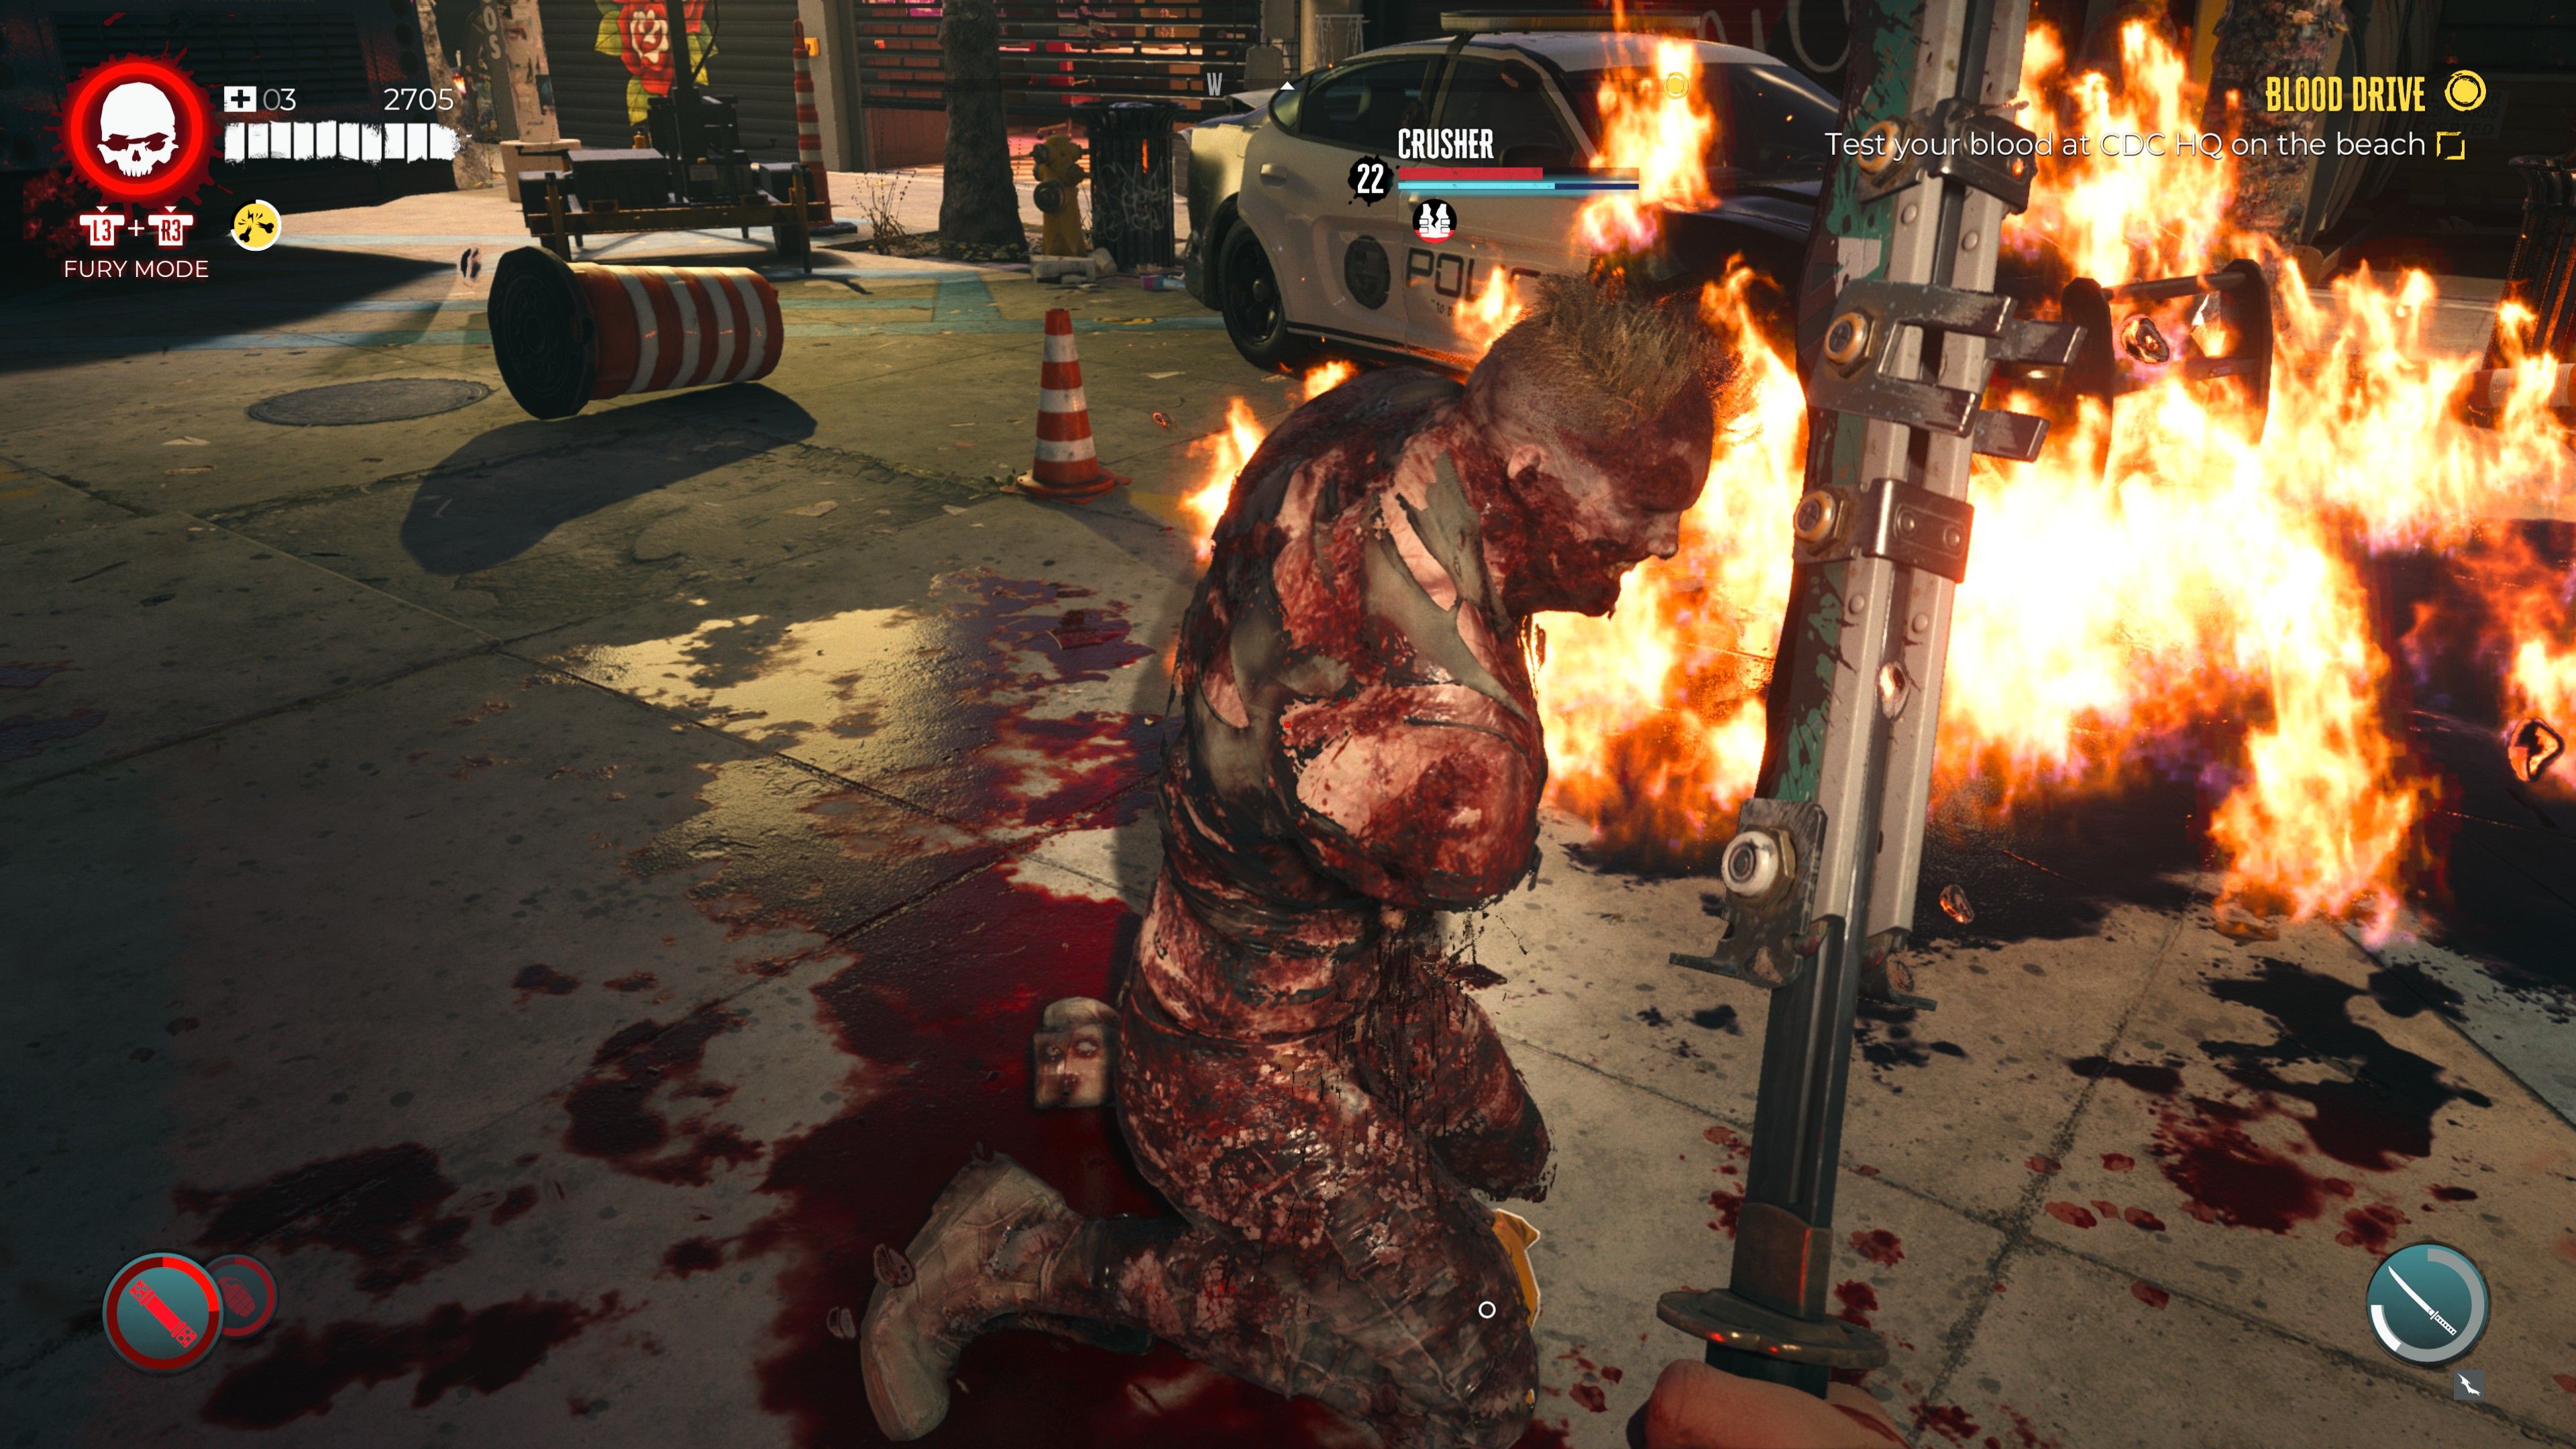 How to Defeat Crushers in Dead Island 2